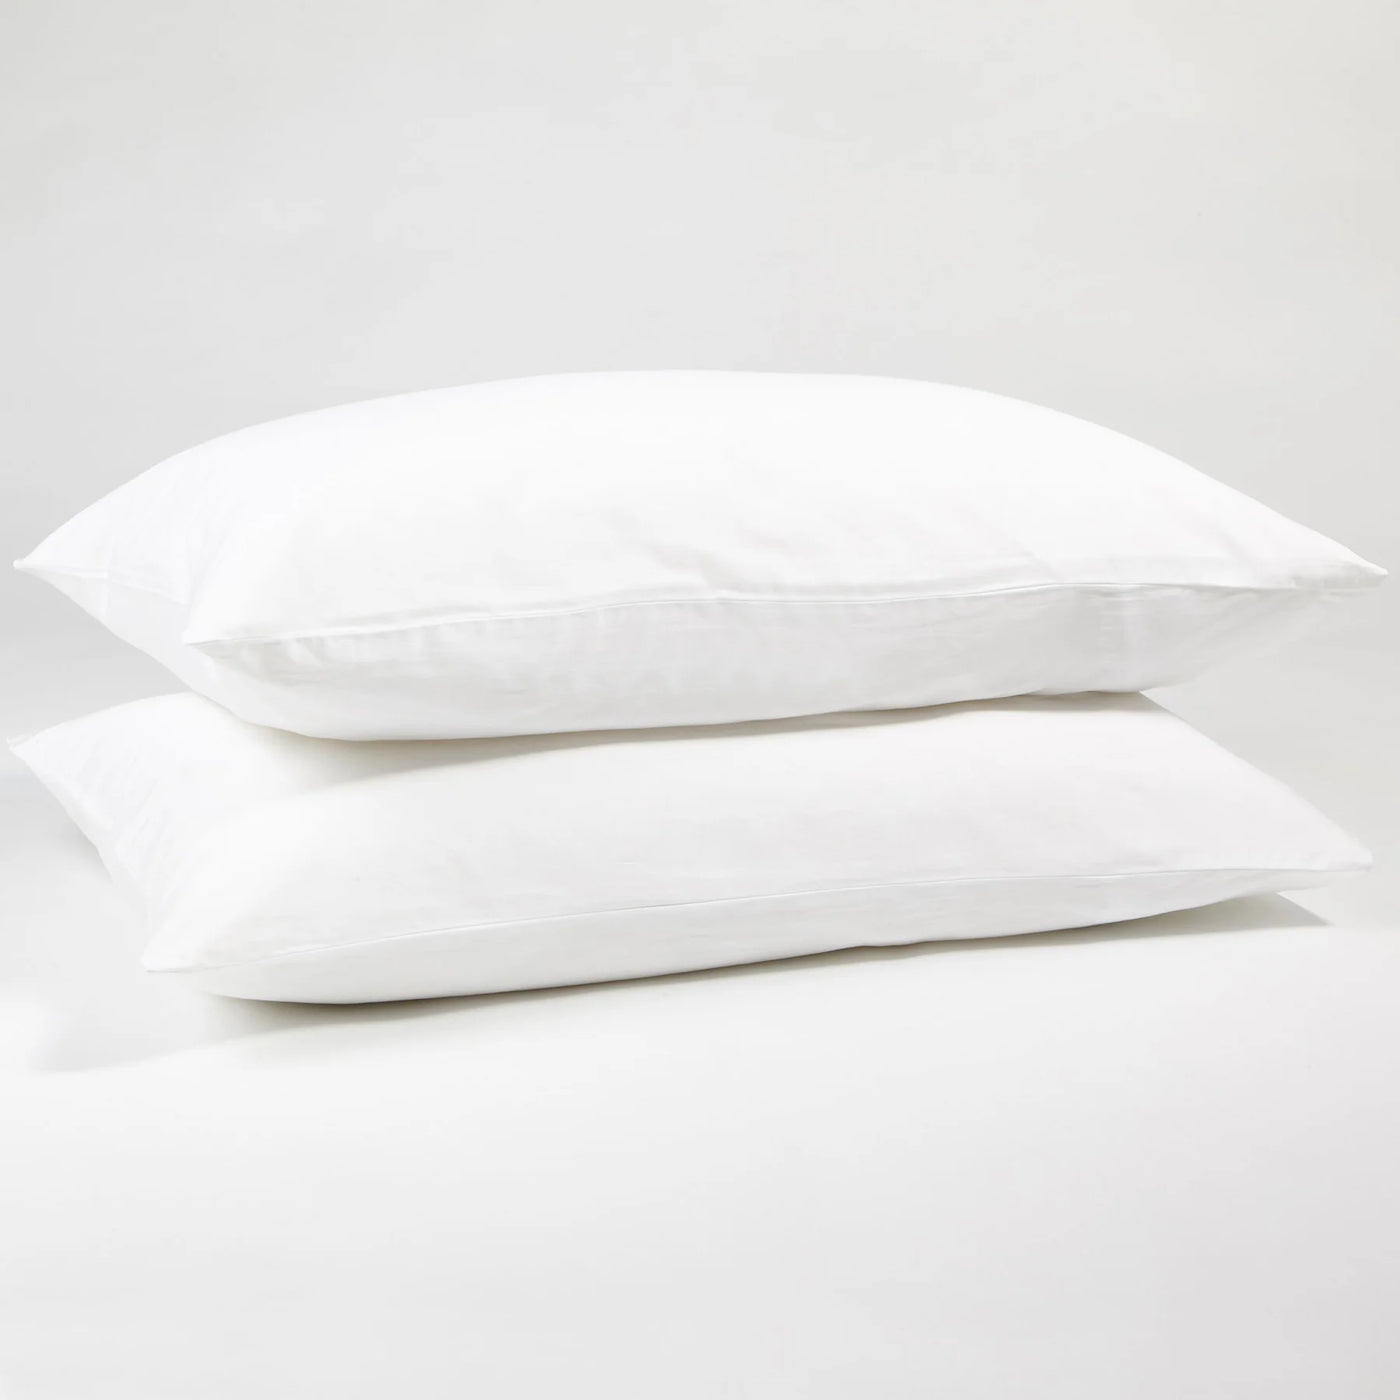 Percale Pillowcases | Polycotton Pillowcases by Linen Cupboard Yorkshire